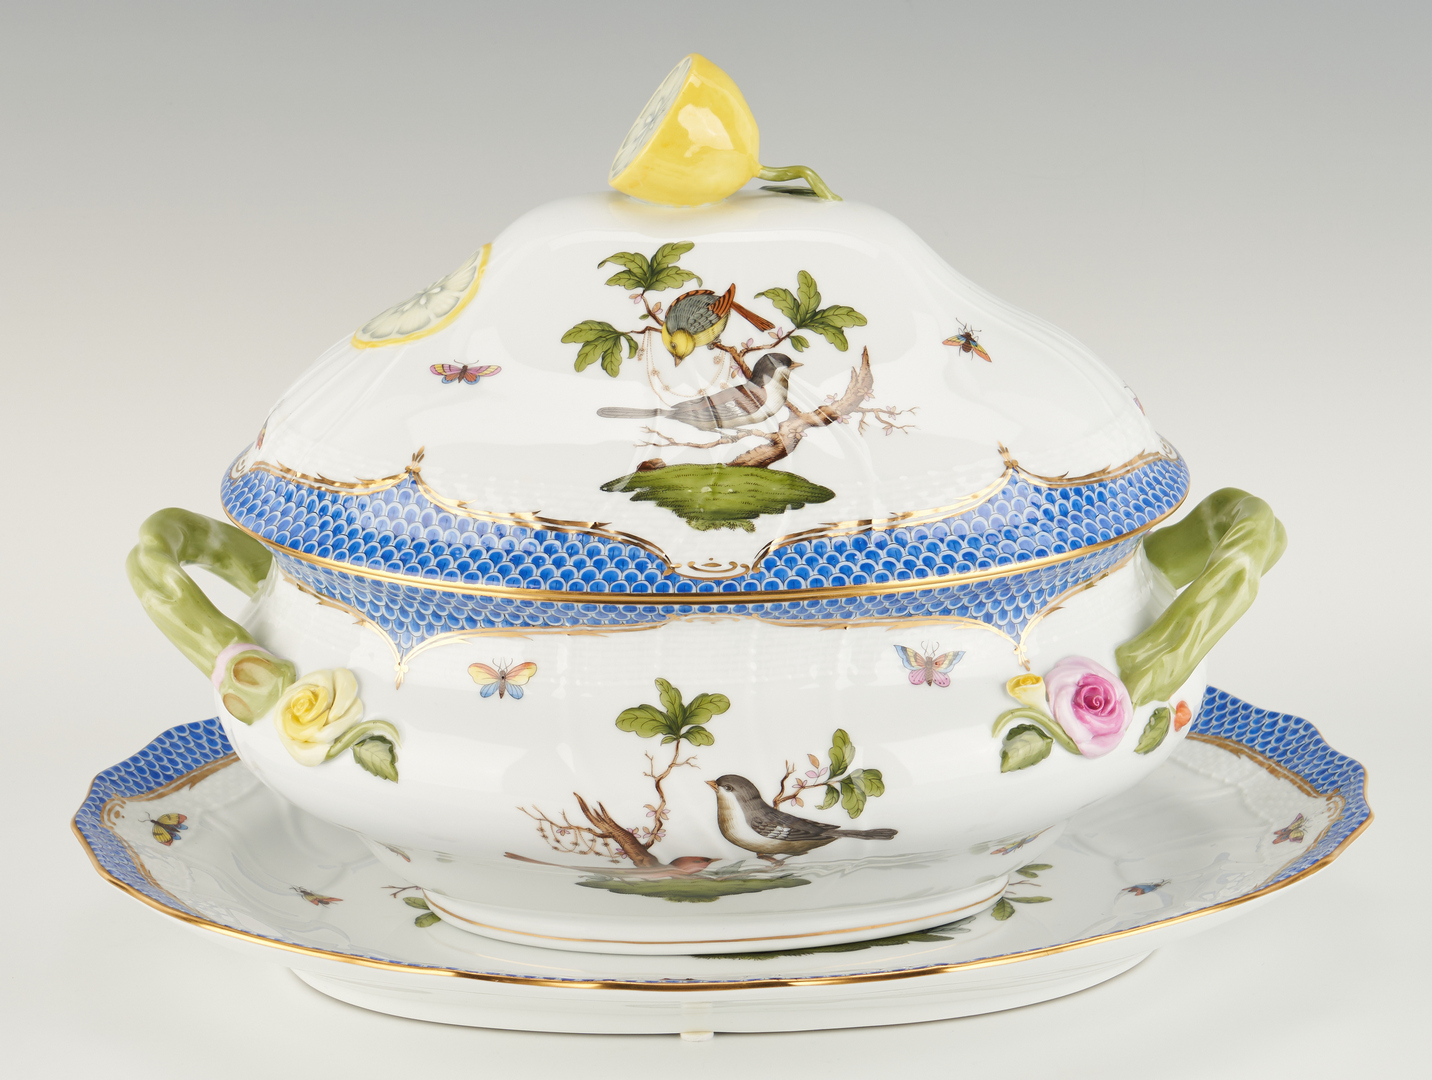 Lot 312: 12 Pcs. Herend Rothschild Blue Bird, incl. Tureen and Placecard Holders